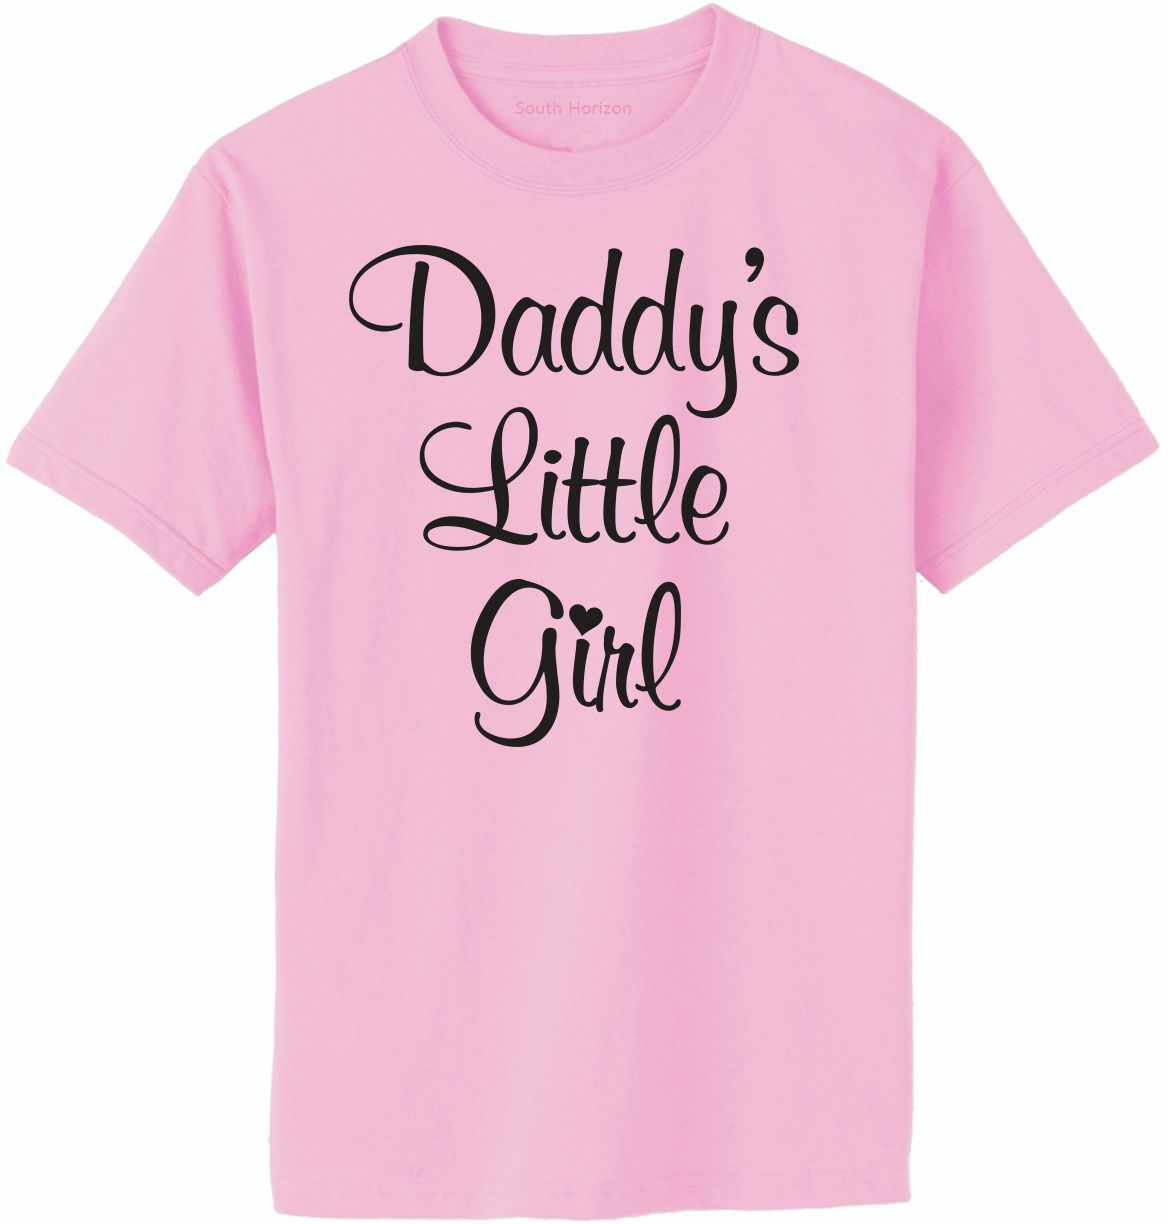 Daddy's Little Girl on Adult T-Shirt